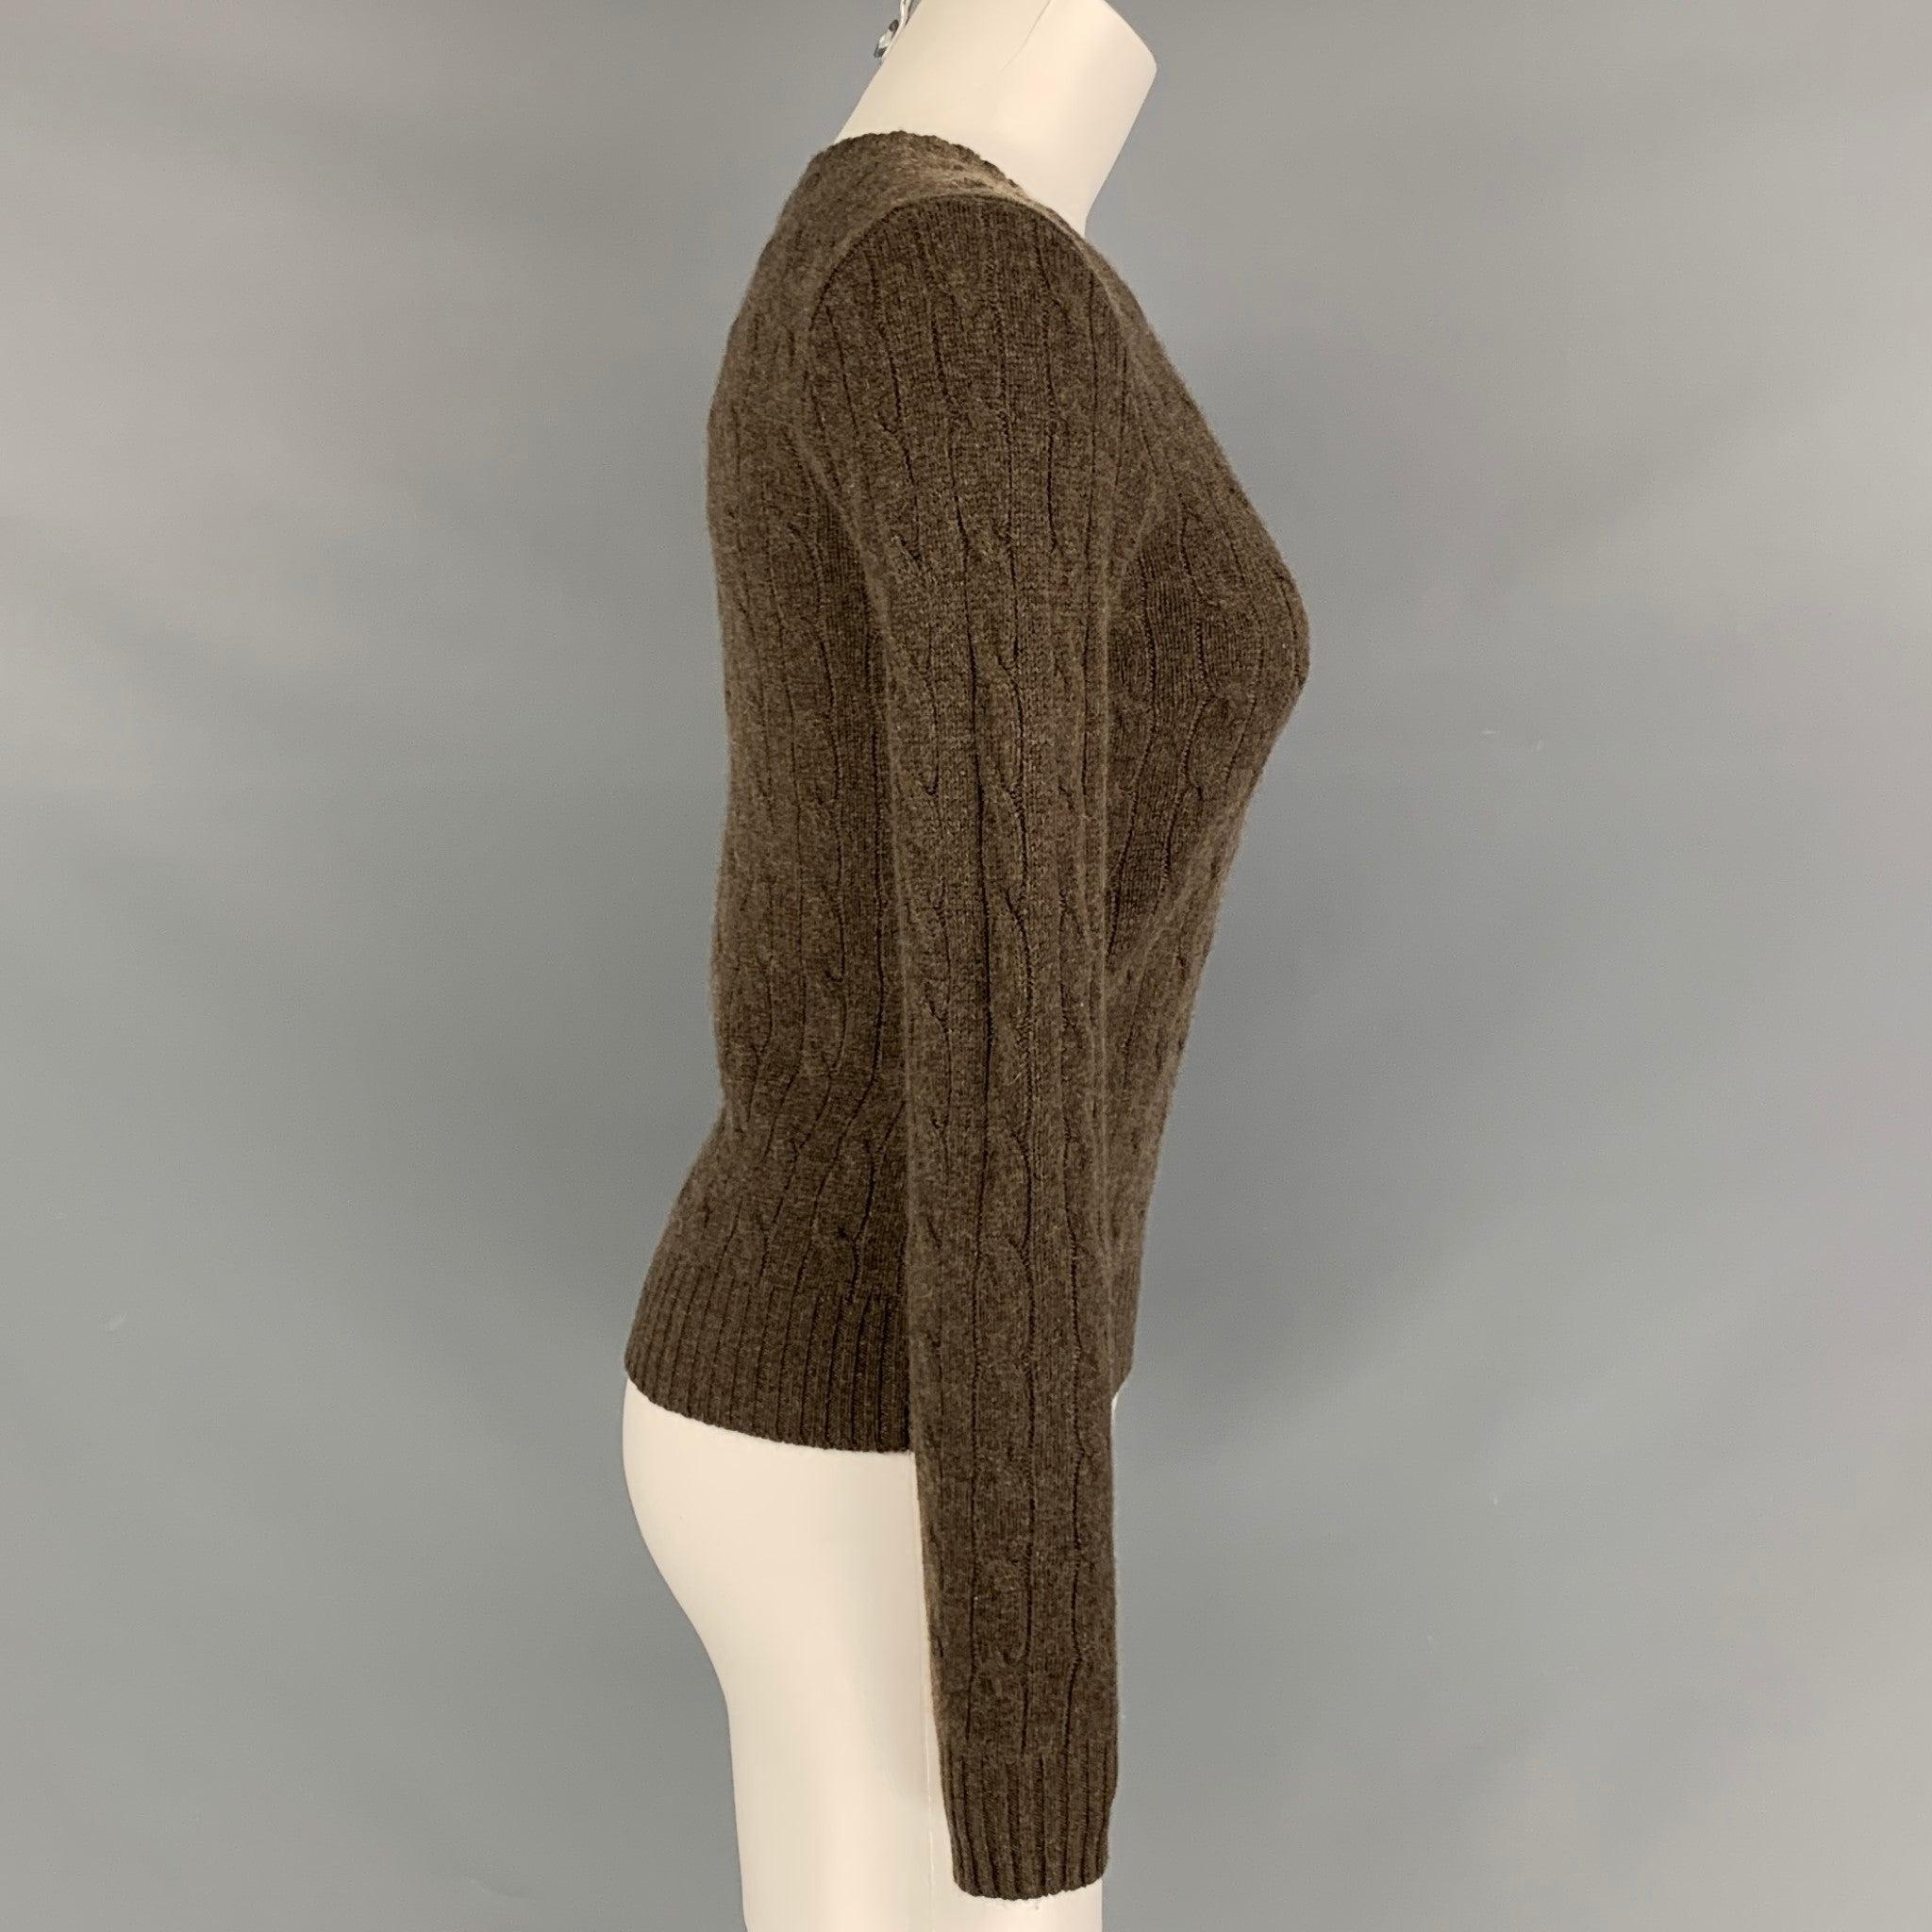 RALPH LAUREN BLACK LABEL by long sleeves cropped sweater comes in a brown knit cashmere featuring crew neck and cable knit style.Very Good Pre-Owned Condition. Minor sign of wear. 

Marked:   no size marked. 

Measurements: 
 
Shoulder: 15 inches